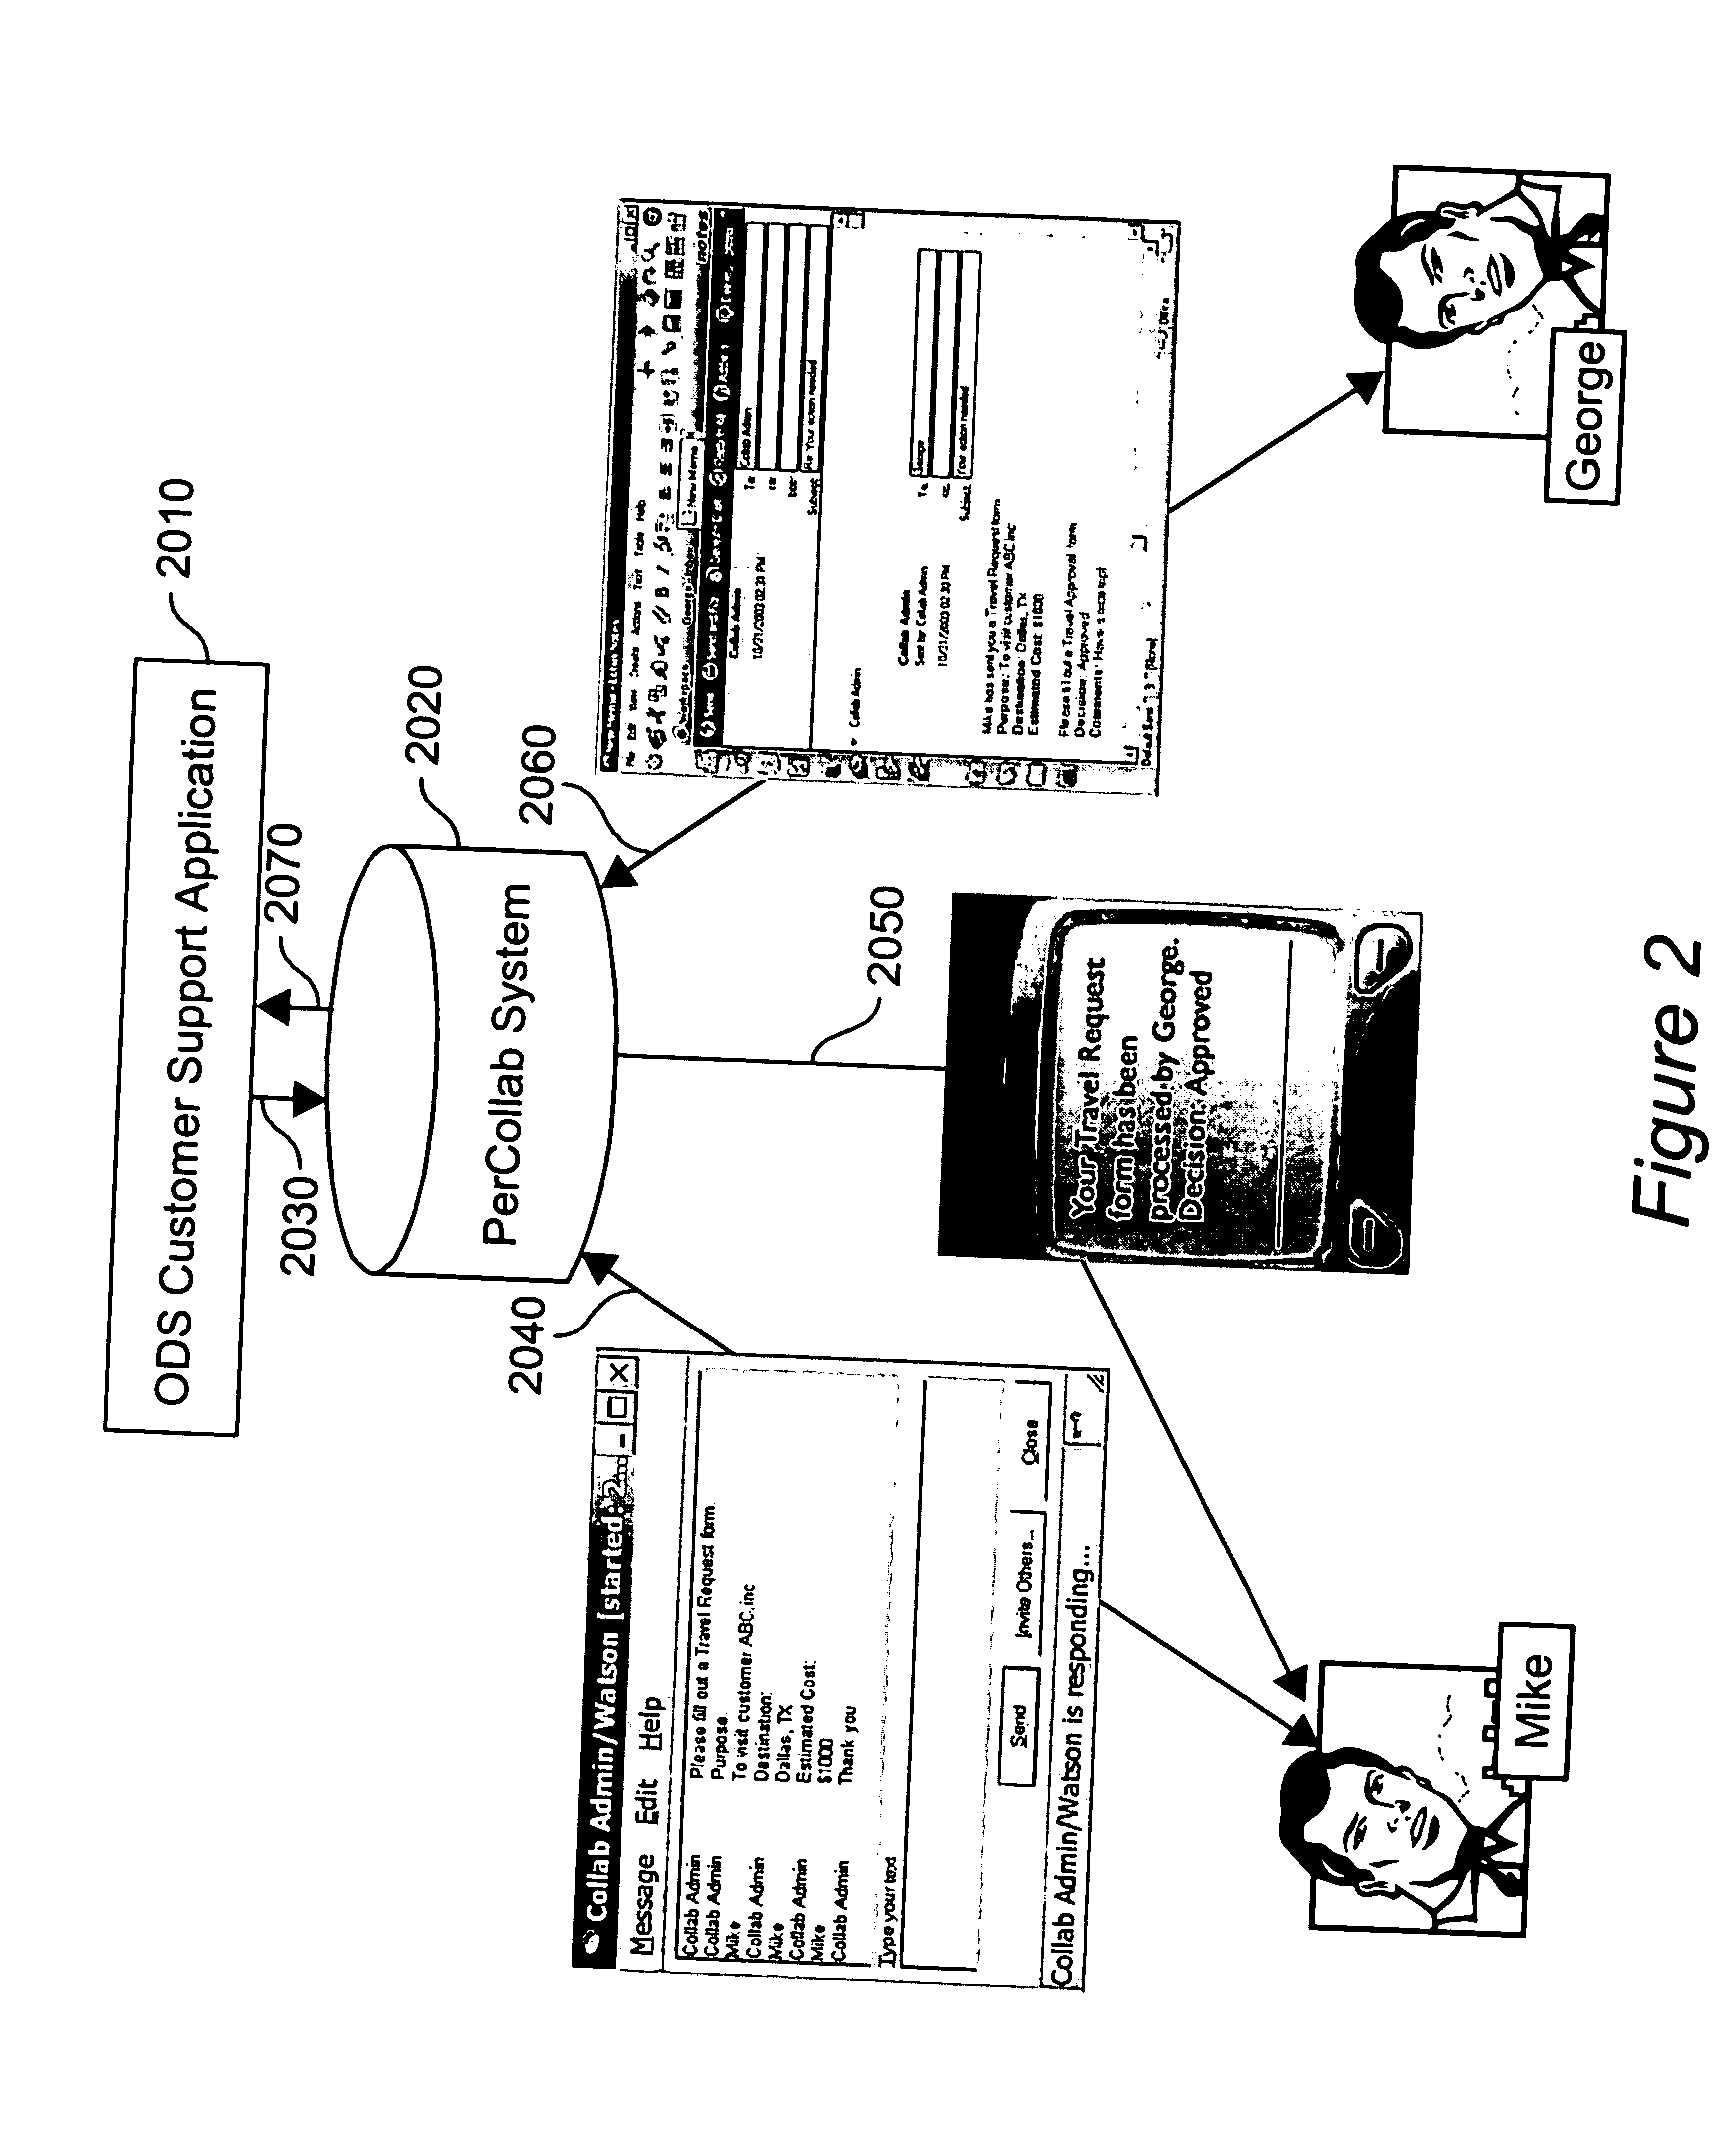 System and method for pervasive enablement of business processes